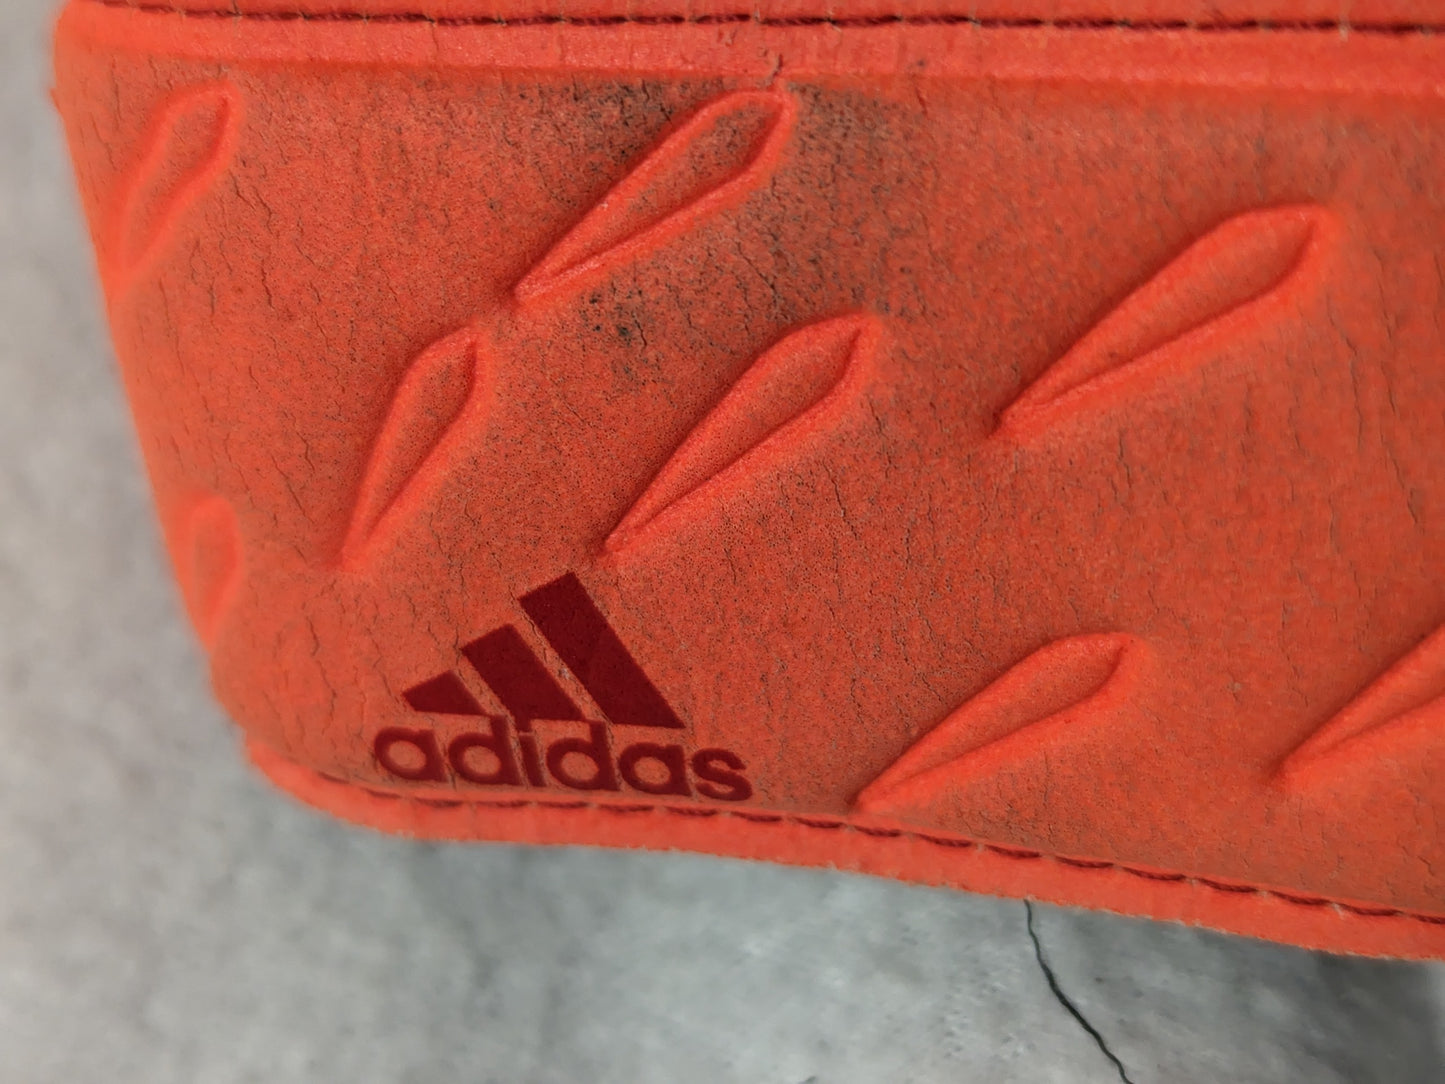 Adidas Predator Youth Soccer Goalie Gloves Size Youth Color Orange Condition Used